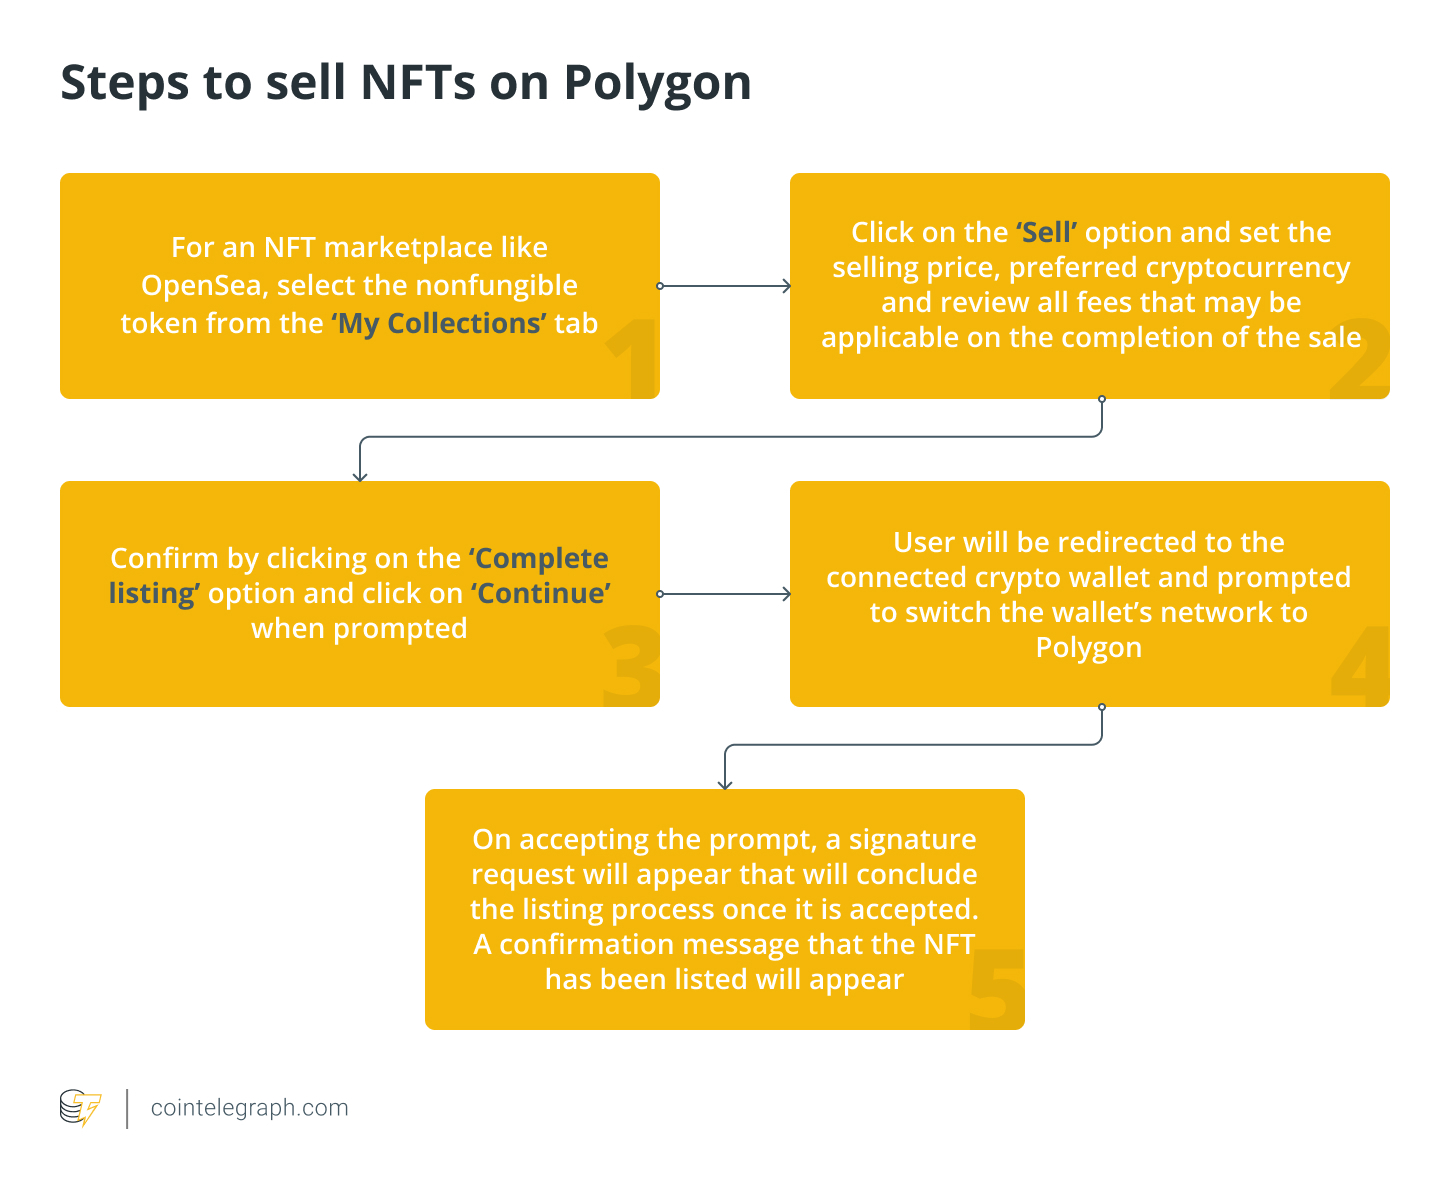 Steps to sell NFTs on Polygon